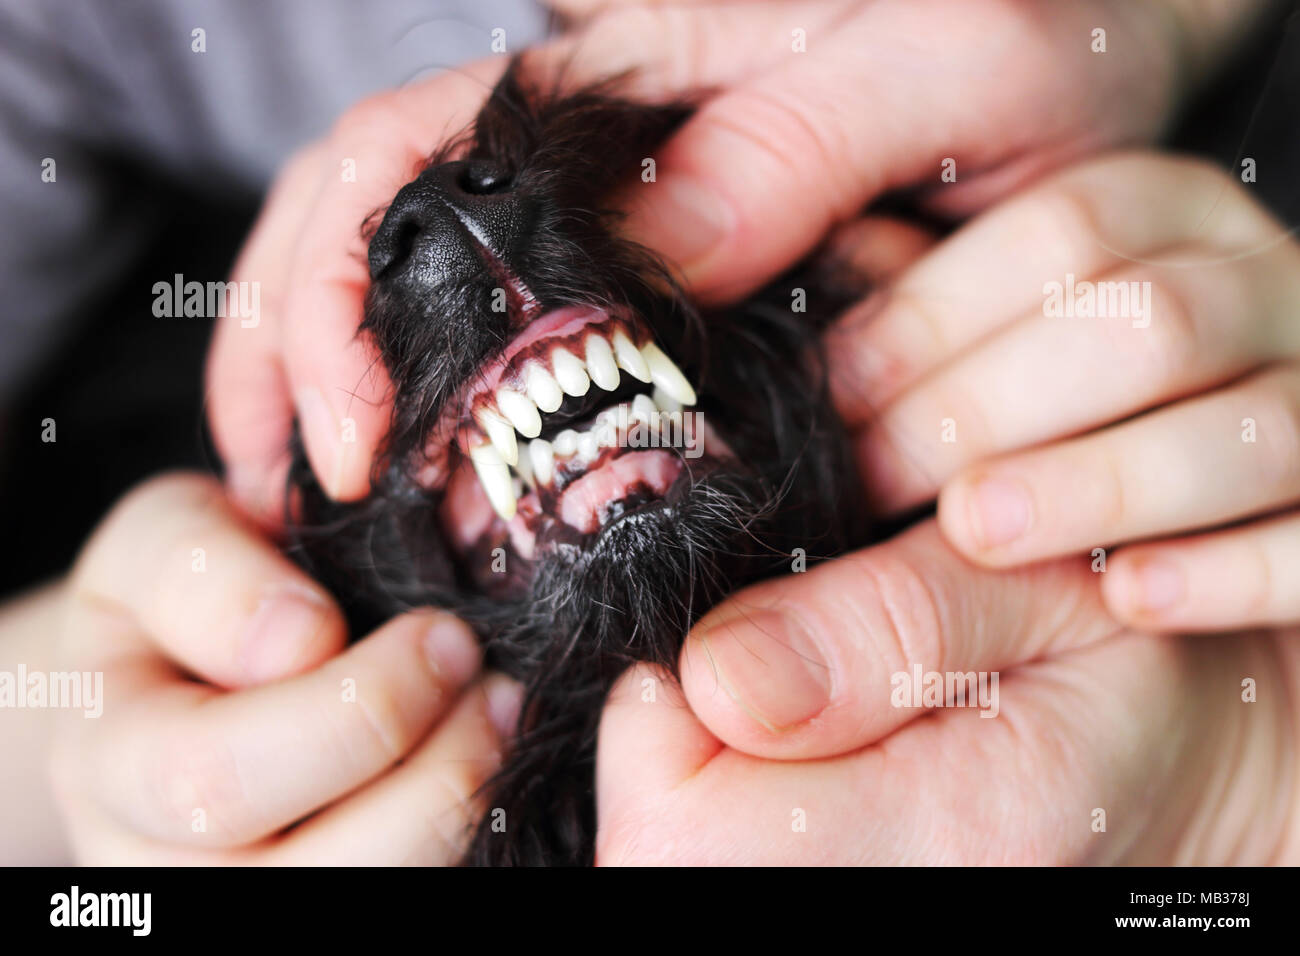 The hands of an adult and the hands of a child open the mouth of a pet dog to see teeth Stock Photo